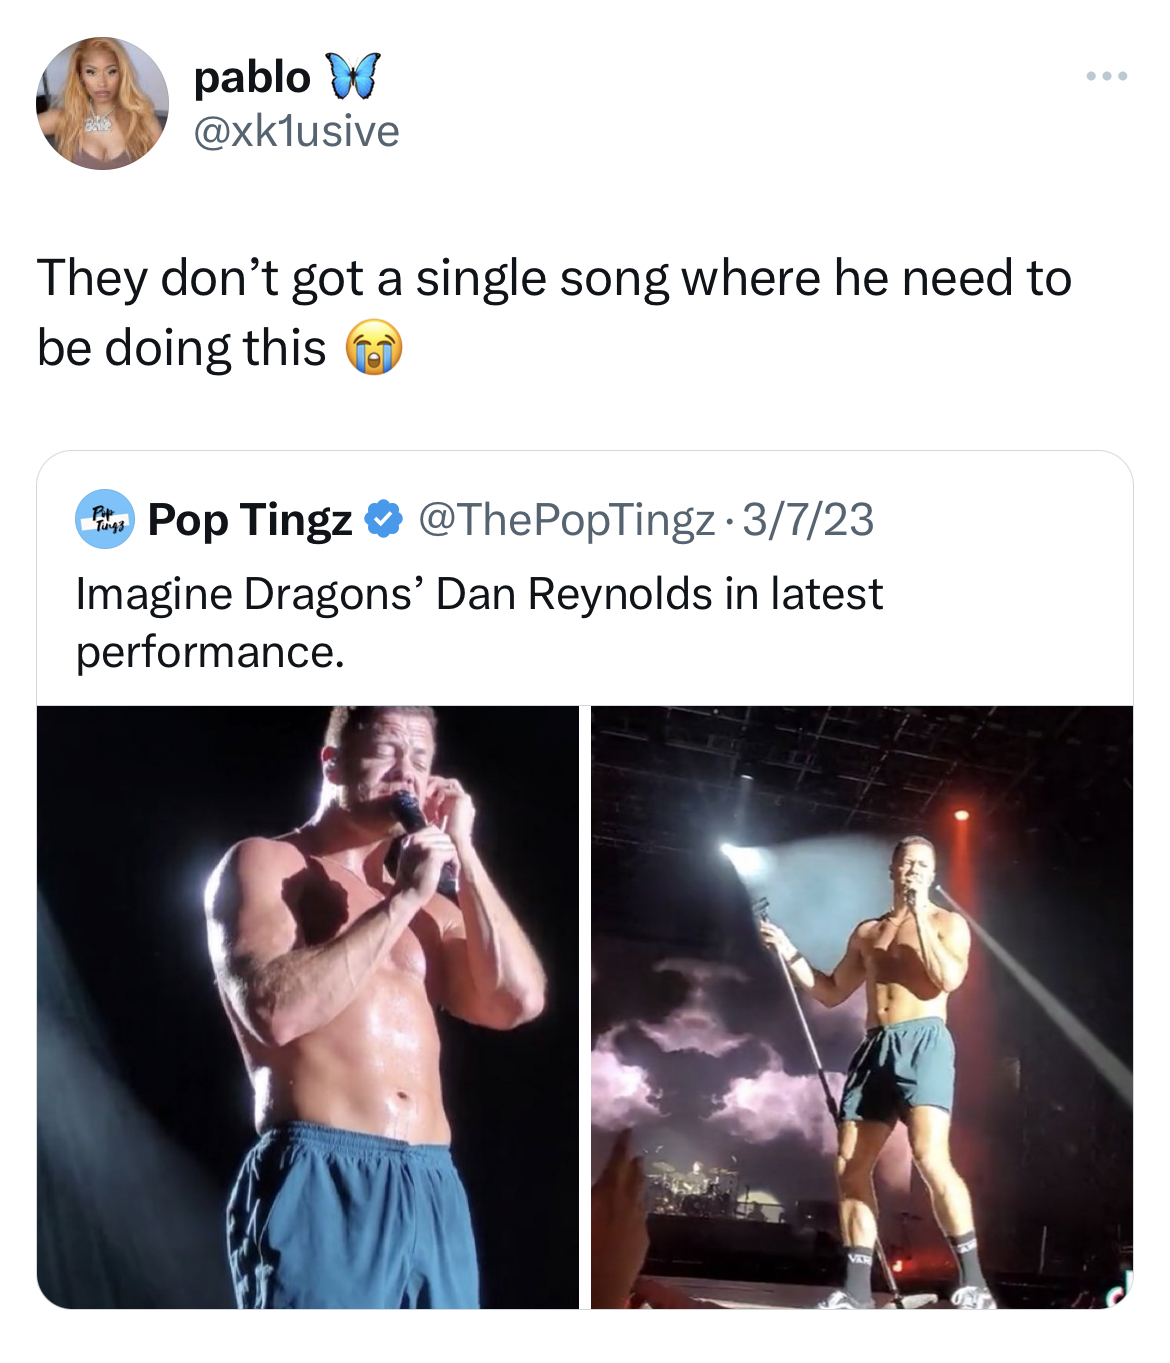 Don't have a single song where they need to do this - shoulder - pablo W They don't got a single song where he need to be doing this Pop Tingz 3723 Imagine Dragons' Dan Reynolds in latest performance.